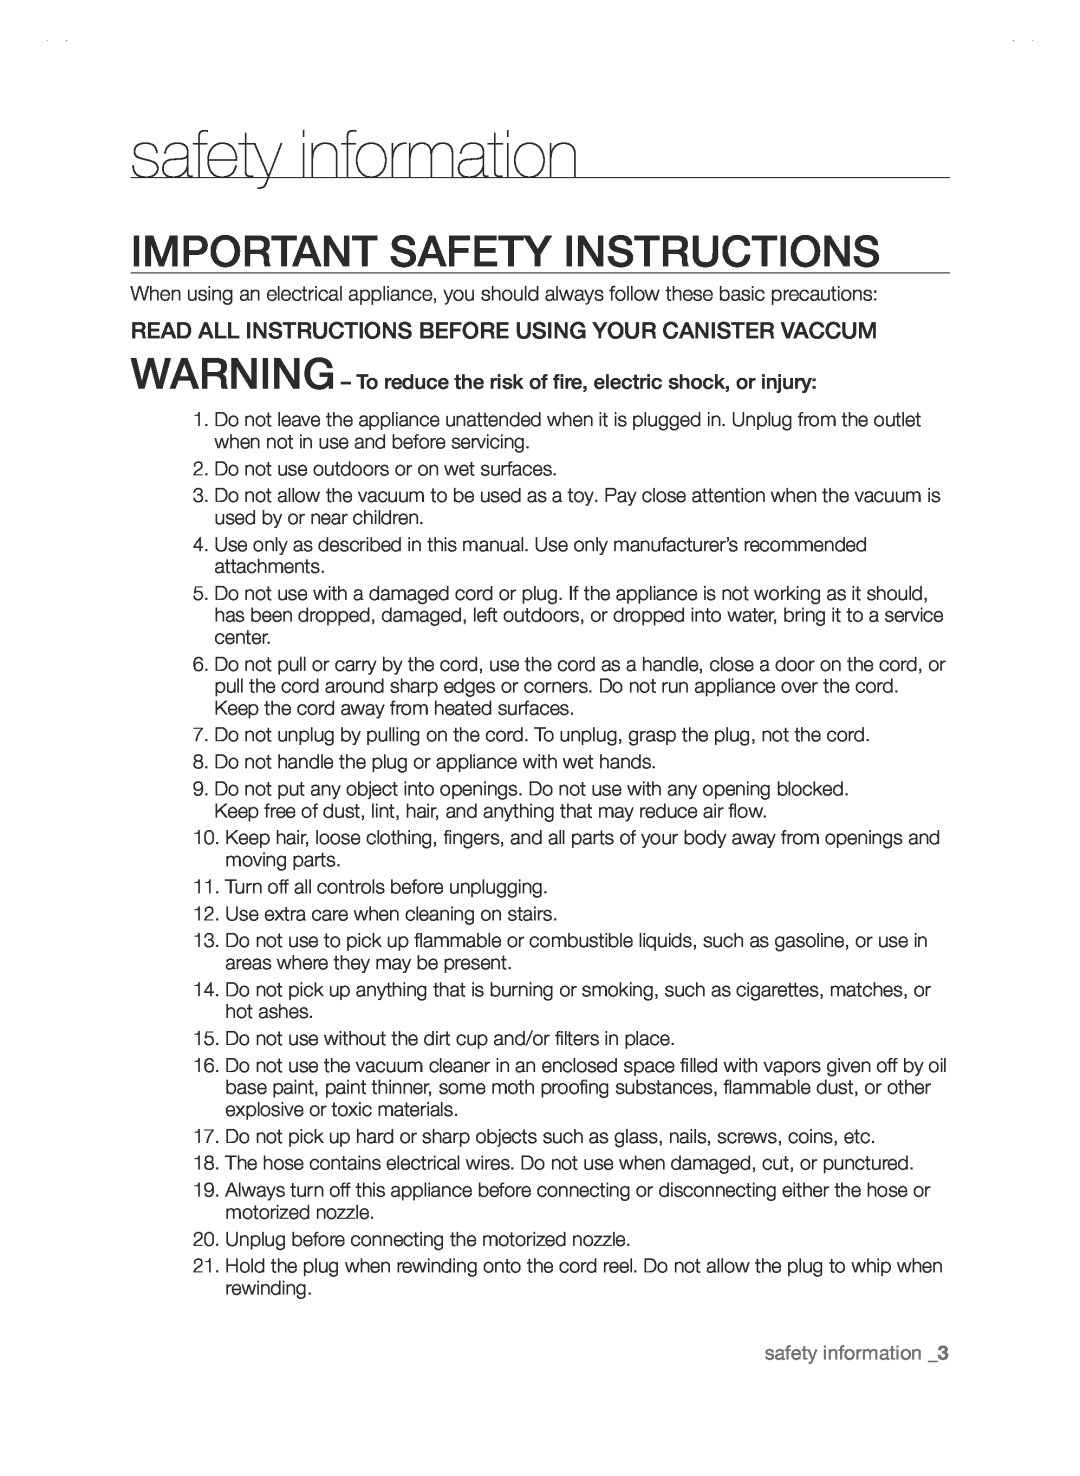 Samsung SC88P user manual Important Safety Instructions, safety information _3 